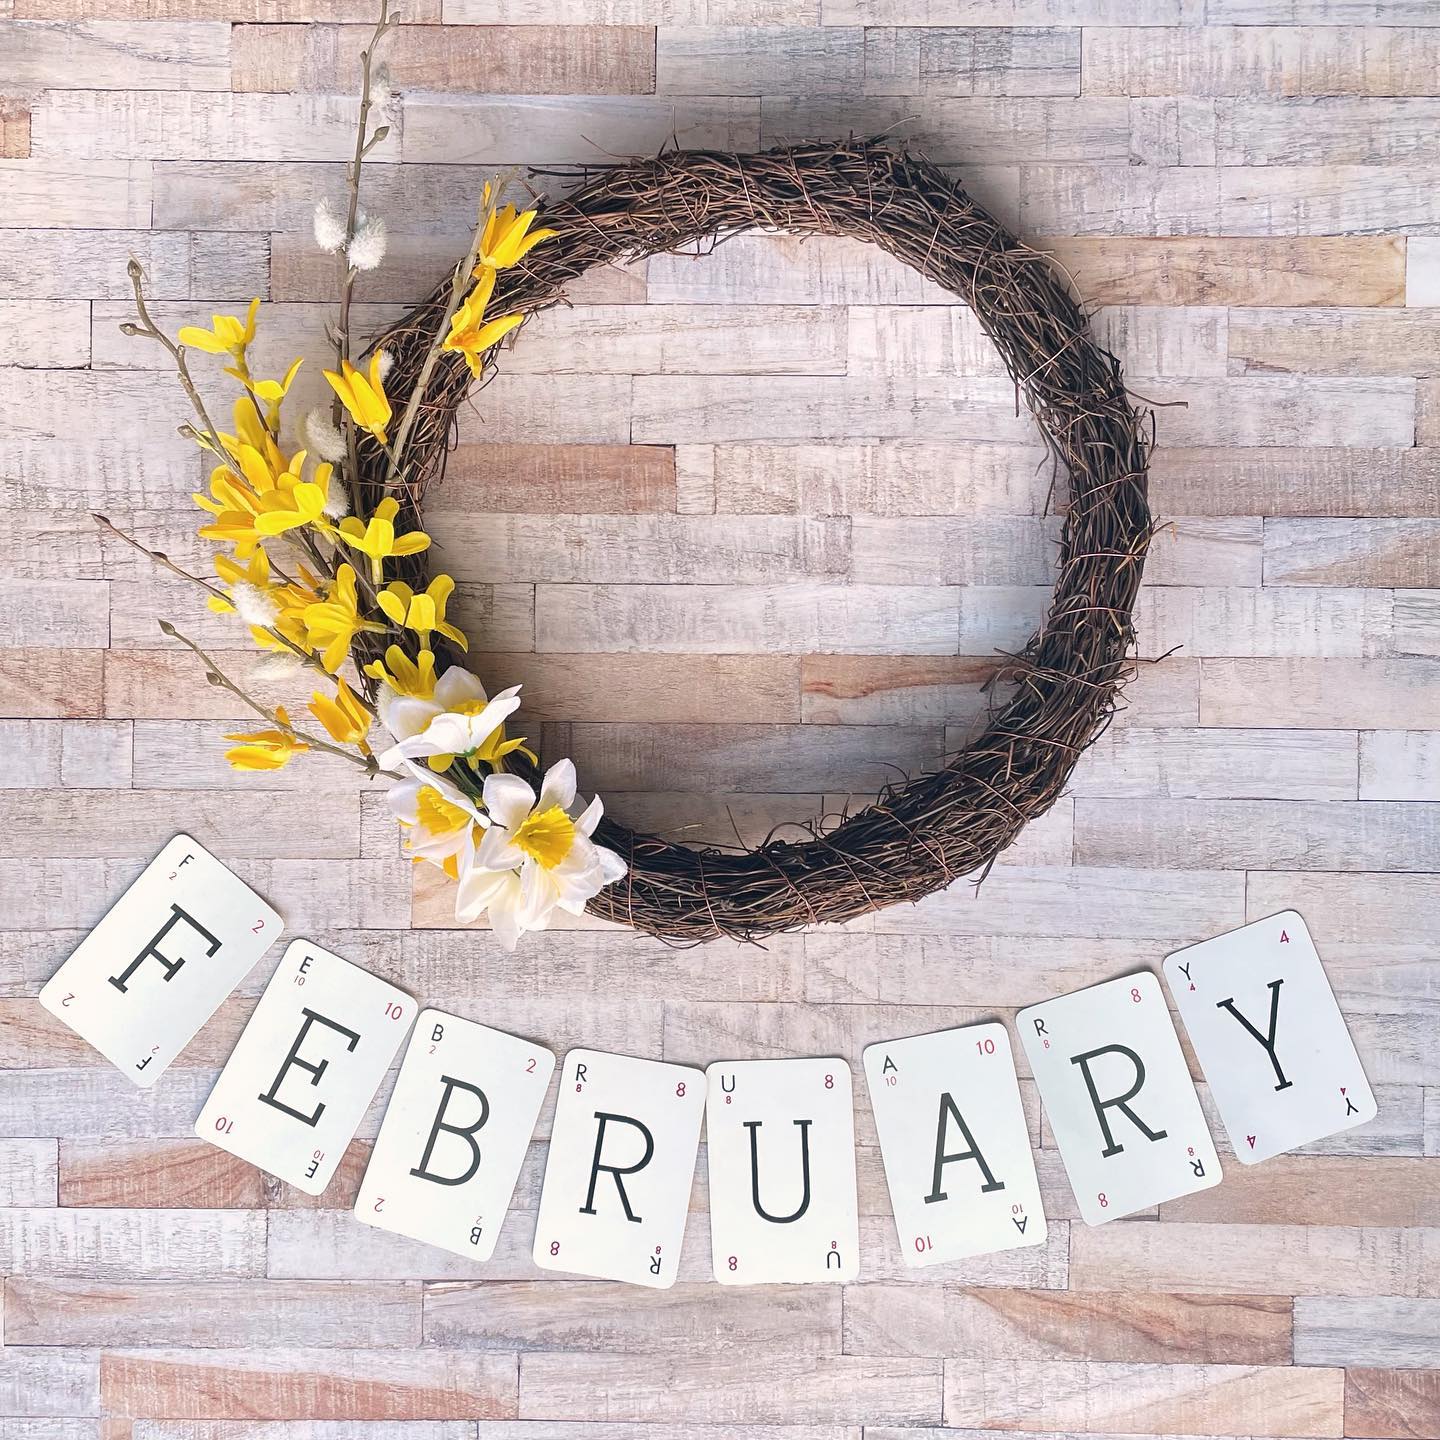 Hello February Flatlay faffing in the shed! New creative opportunities for me this month - can't wait to get started. Also enjoying lighter longer days and signs of new life in the garden. (Spring wreaths for your home from £20, created by me!) What do you love about February?